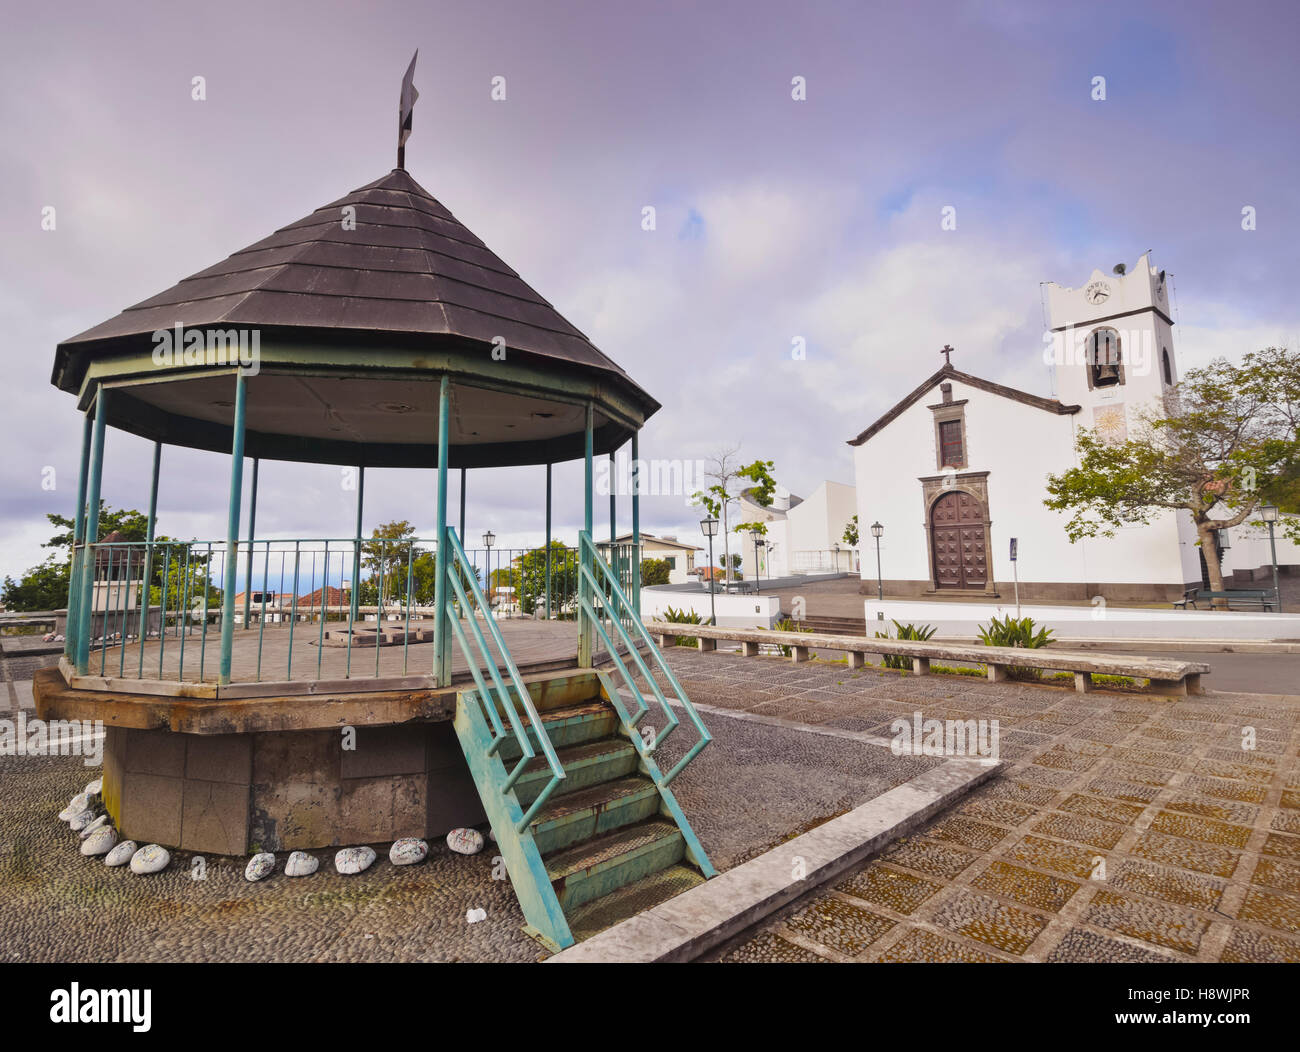 Portugal, Madeira, View of the church in Santana. Stock Photo